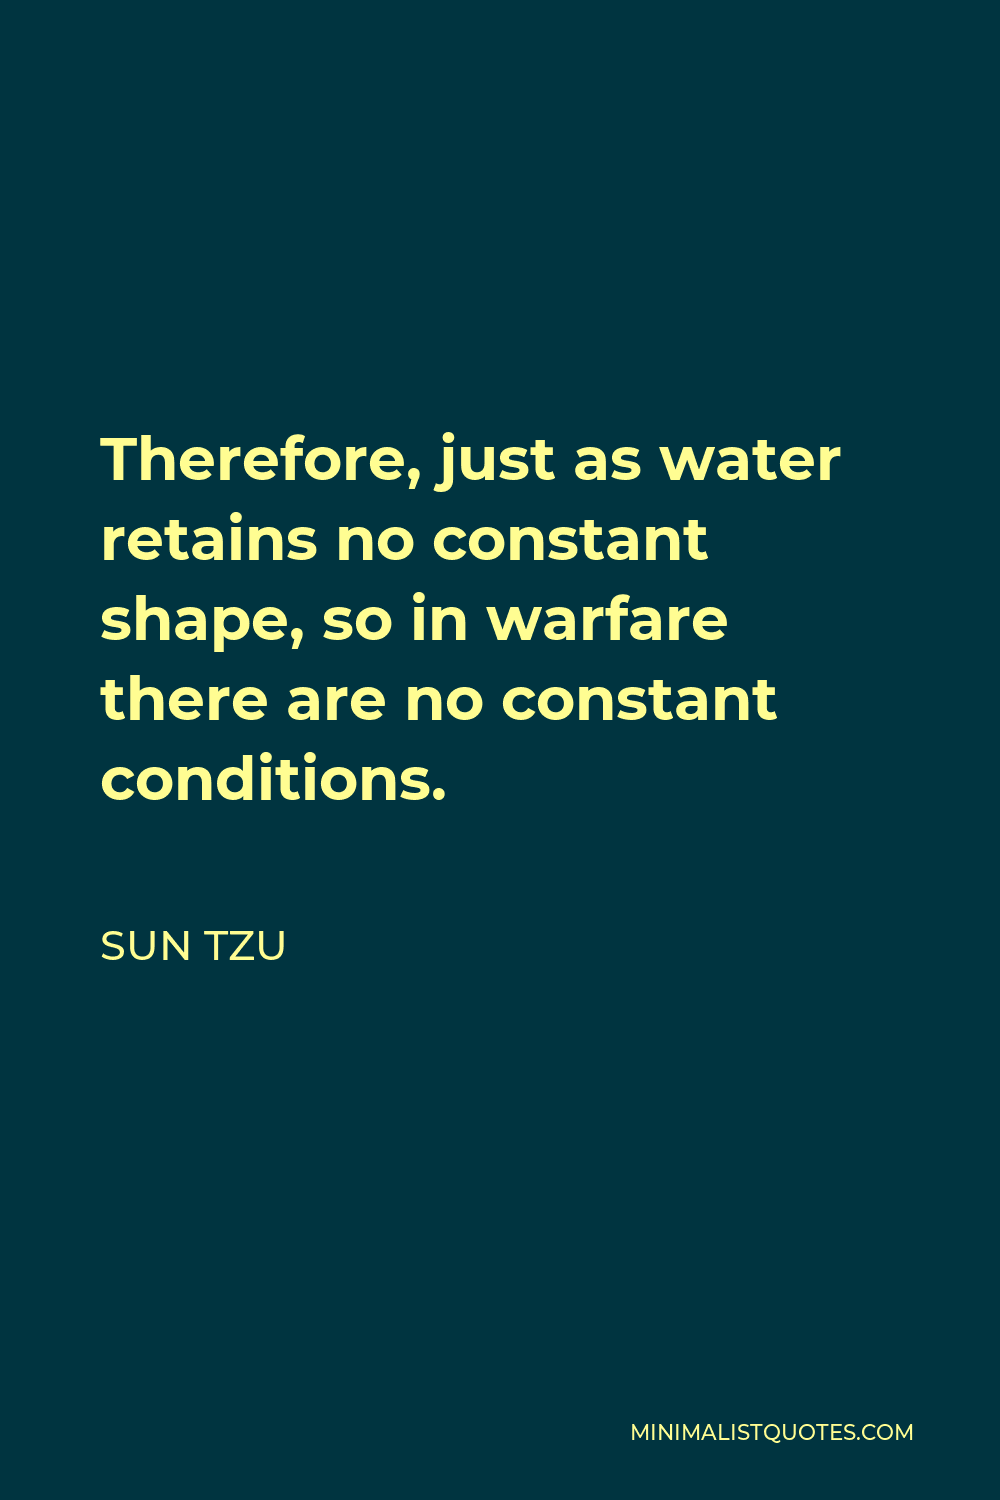 Sun Tzu Quote - Therefore, just as water retains no constant shape, so in warfare there are no constant conditions.